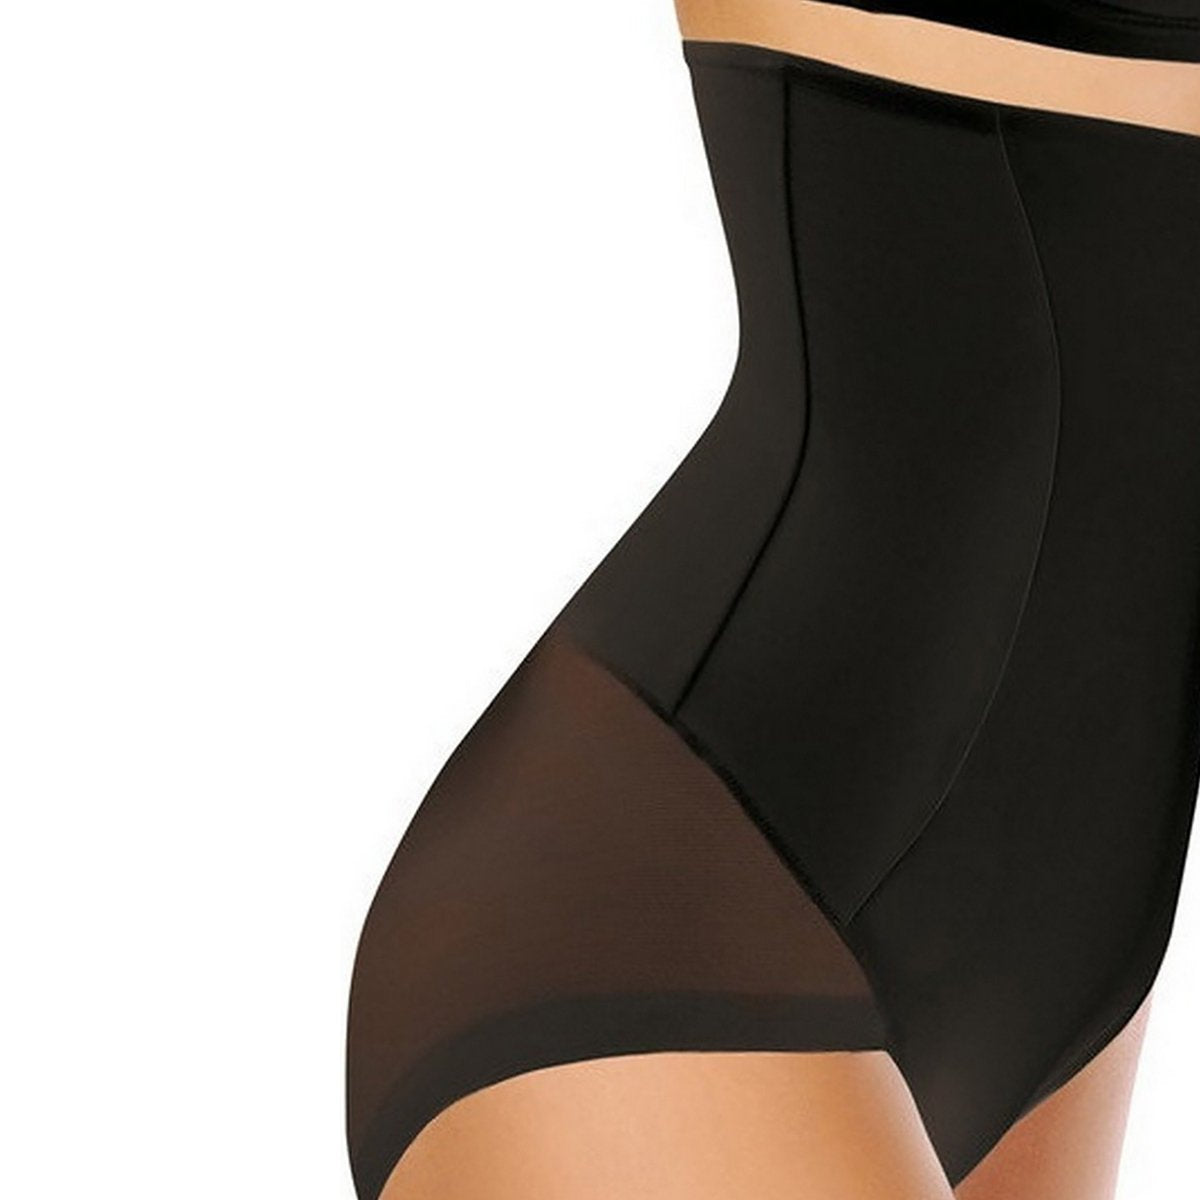 Simply Contour Body Shapewear Undergarment - Set of 2 | Collections Etc.